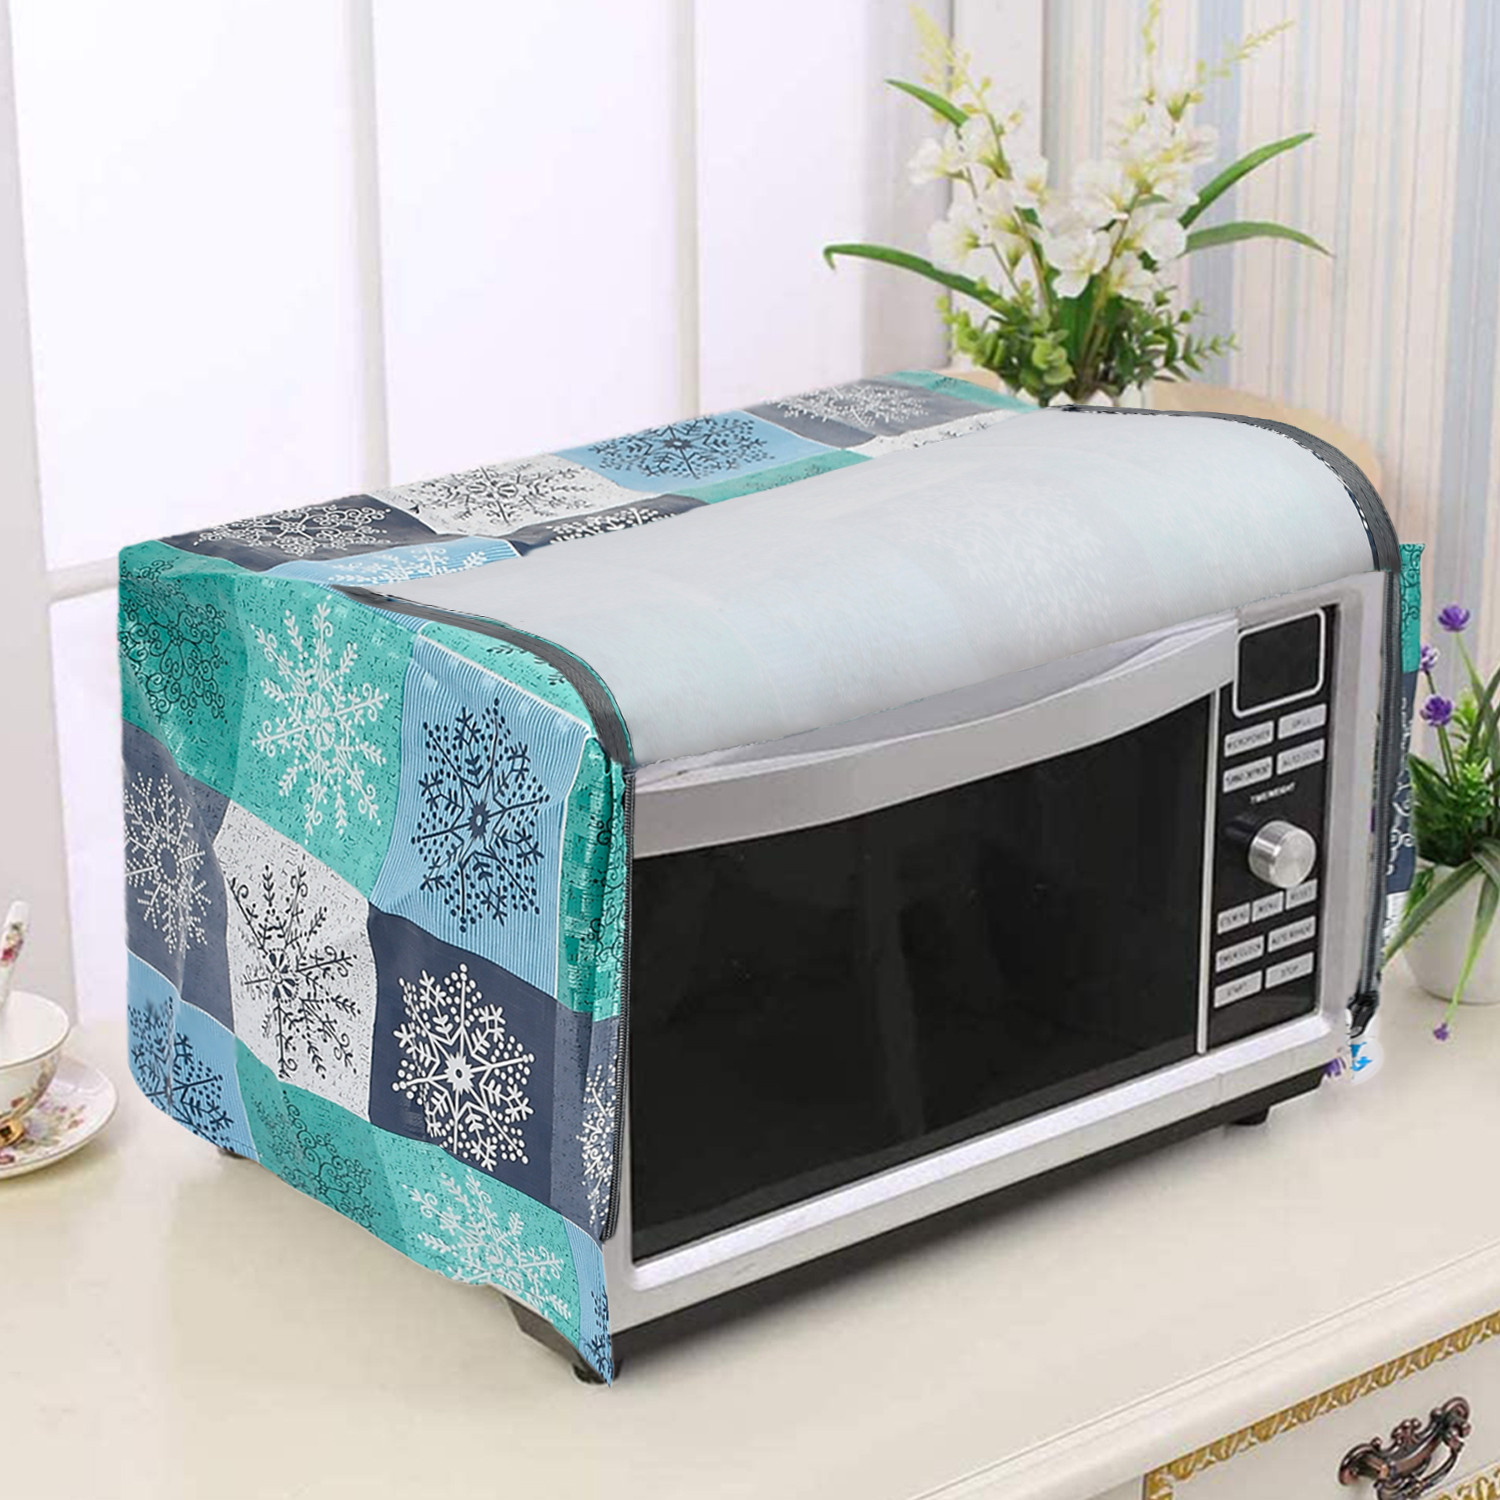 Kuber Industries PVC Check Printed Microwave Oven Cover, Dustproof Machine Protector Cover,25 Ltr. (Sky Blue)